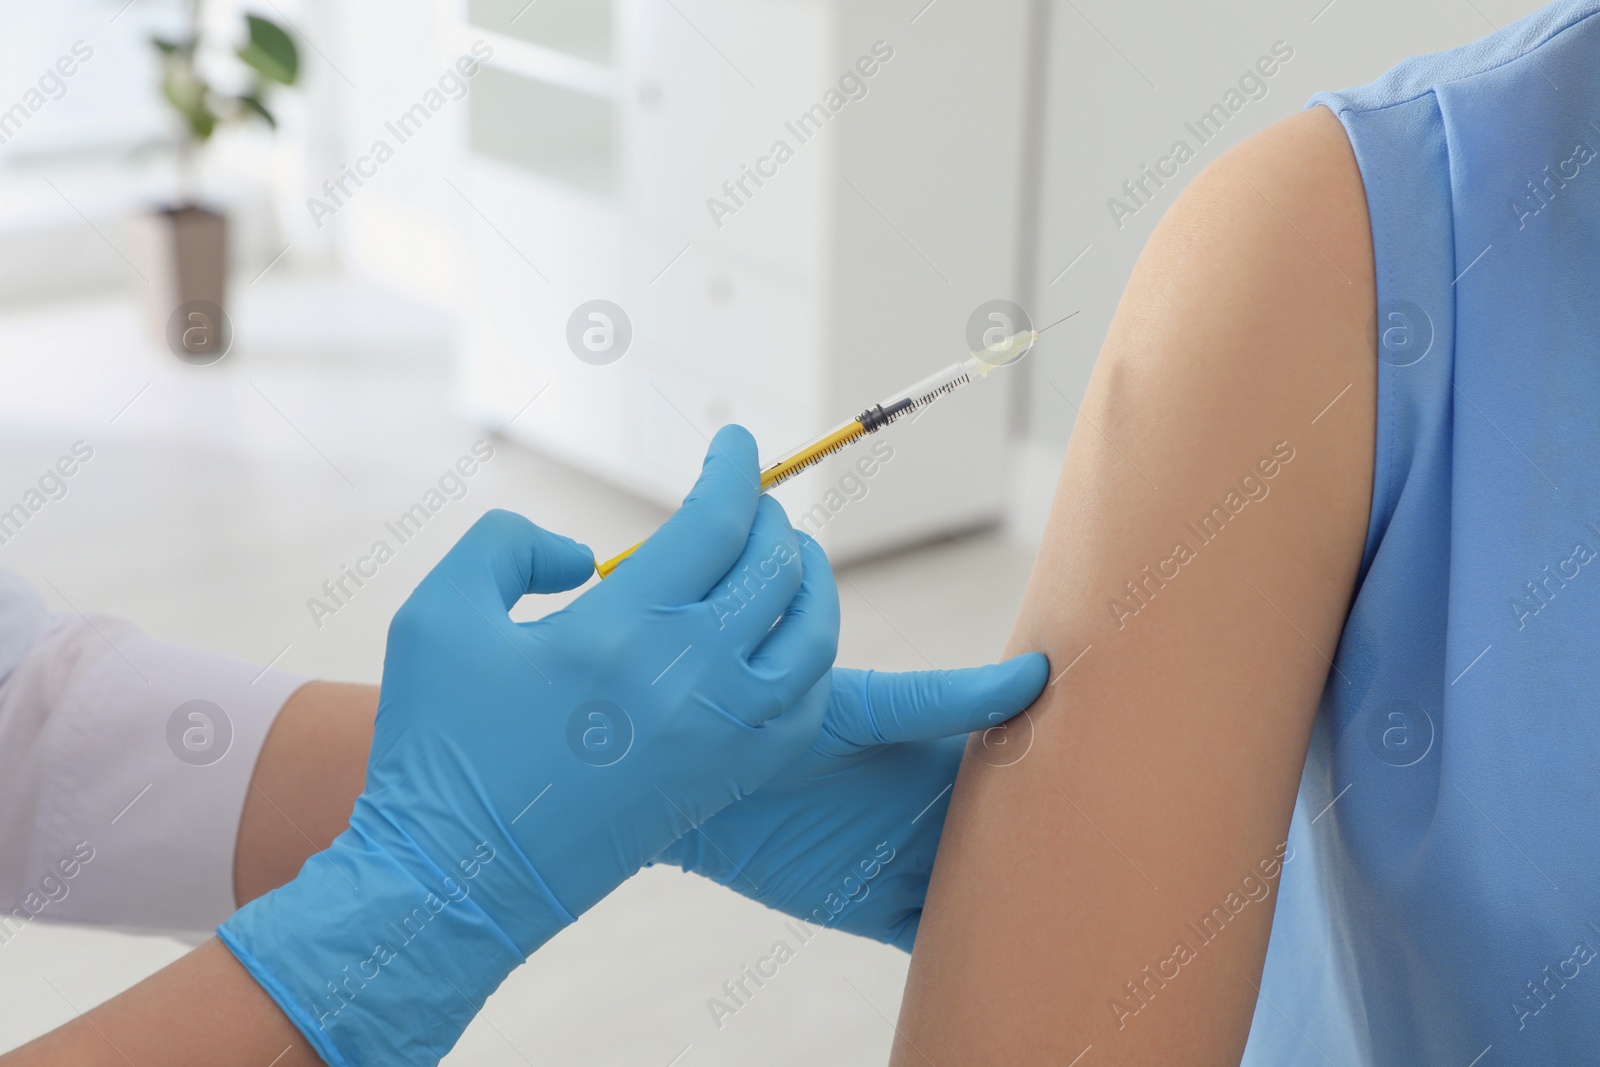 Photo of Doctor giving injection to woman in hospital, closeup. Immunization concept